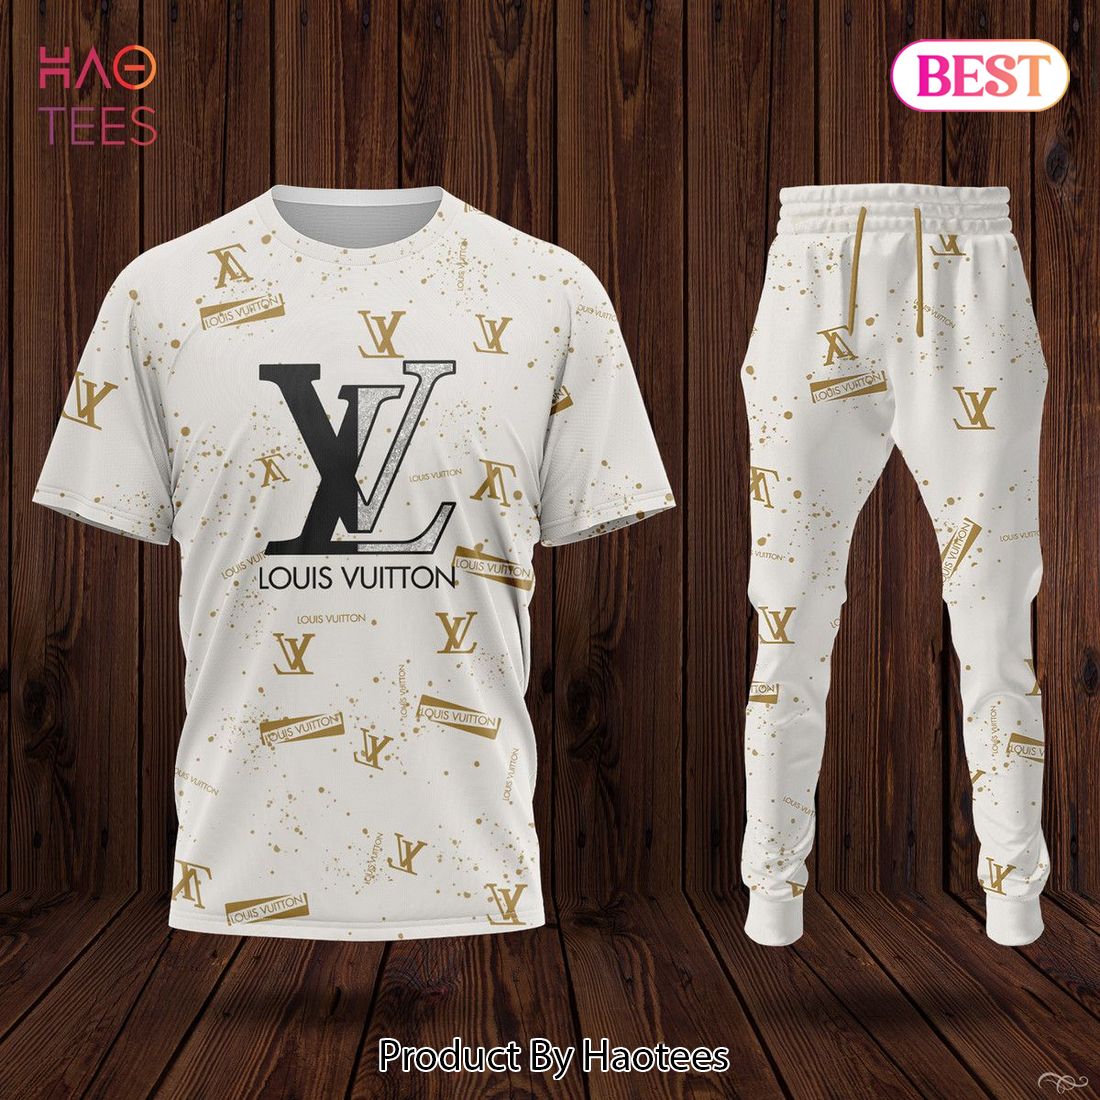 HOT Louis Vuitton White Mix Gold Luxury Brand T-Shirt And Pants Limited Edition